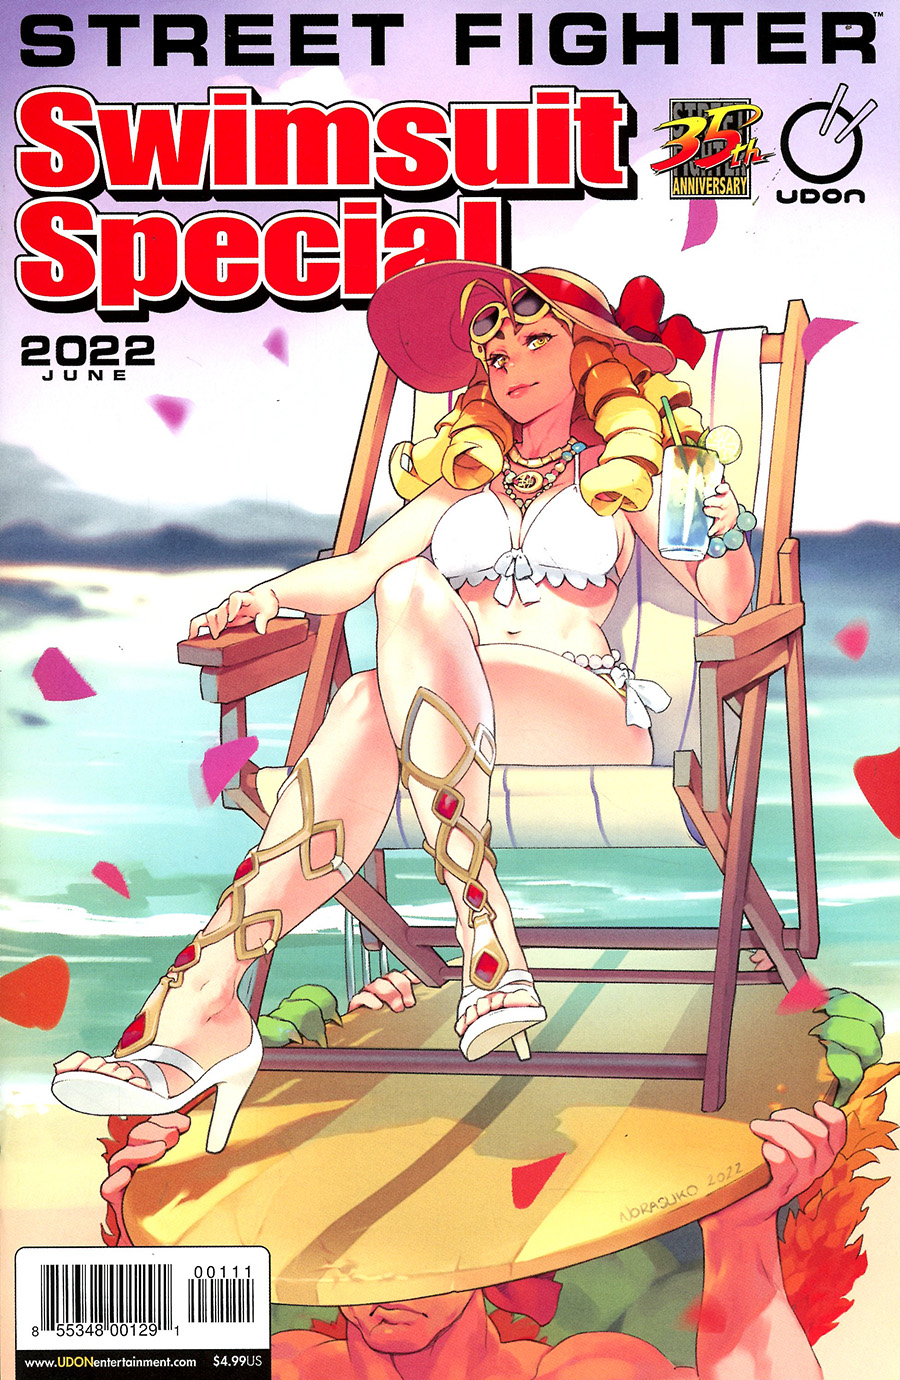 Street Fighter Swimsuit Special 2022 #1 (One Shot) Cover A Regular Norasuko Cover